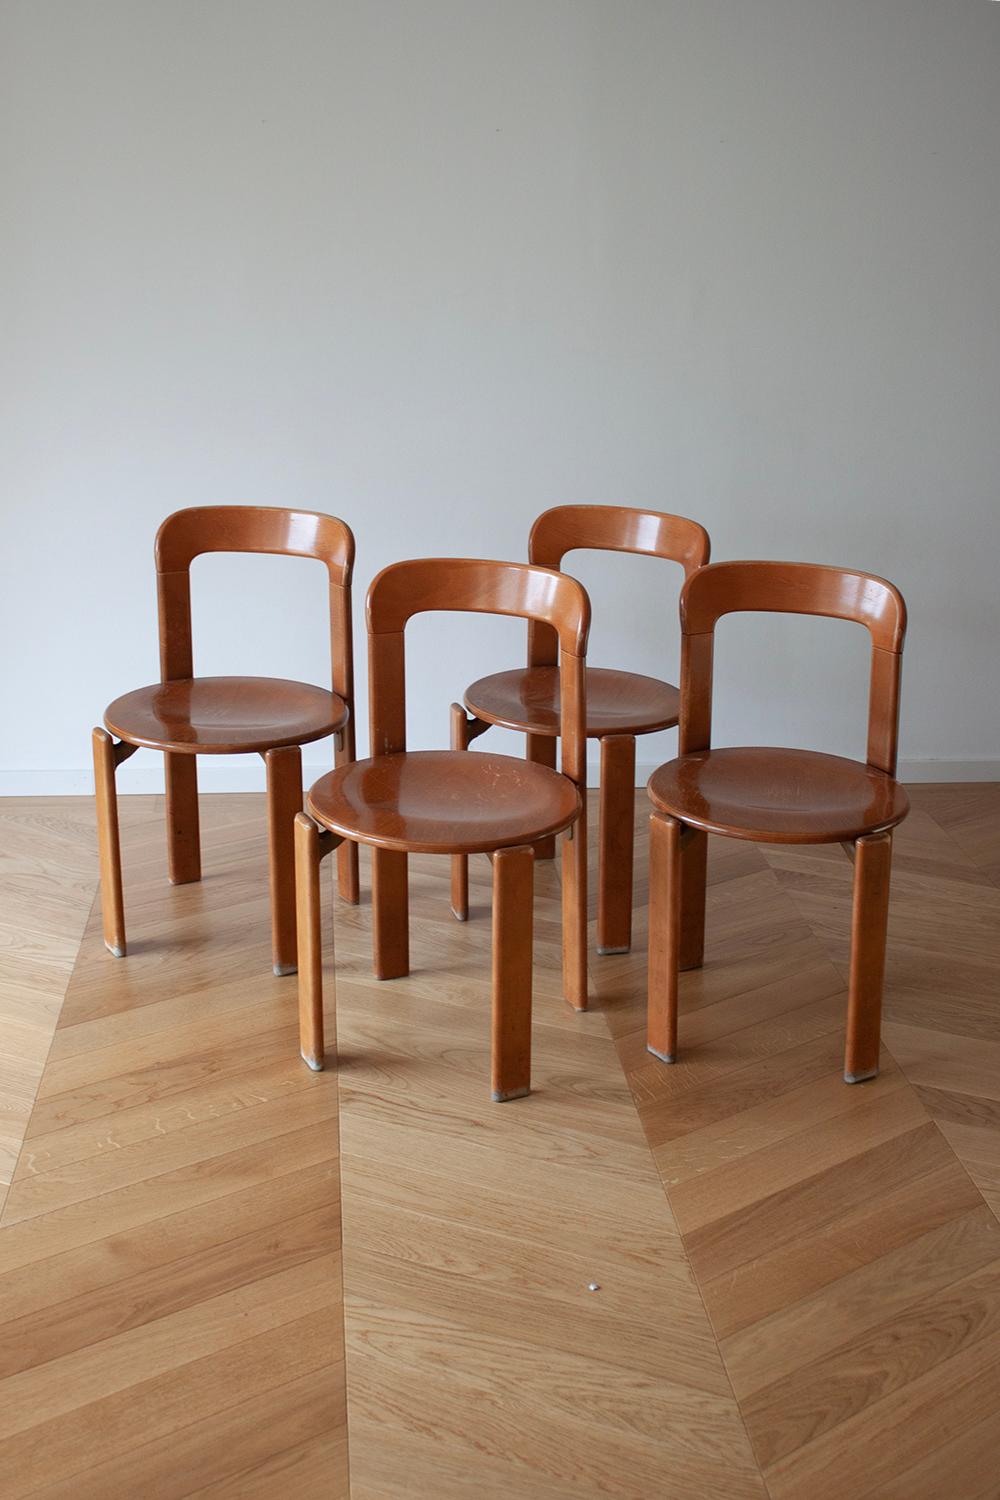 Available are 6 original Bruno Rey chairs. Made by Dietiker in Stein am Rhein, Switzerland. 

These Swiss design classics have been a staple of Swiss interiors since 1971.
Its minimal, rounded, and timeless shape has never gone out of style. The Rey